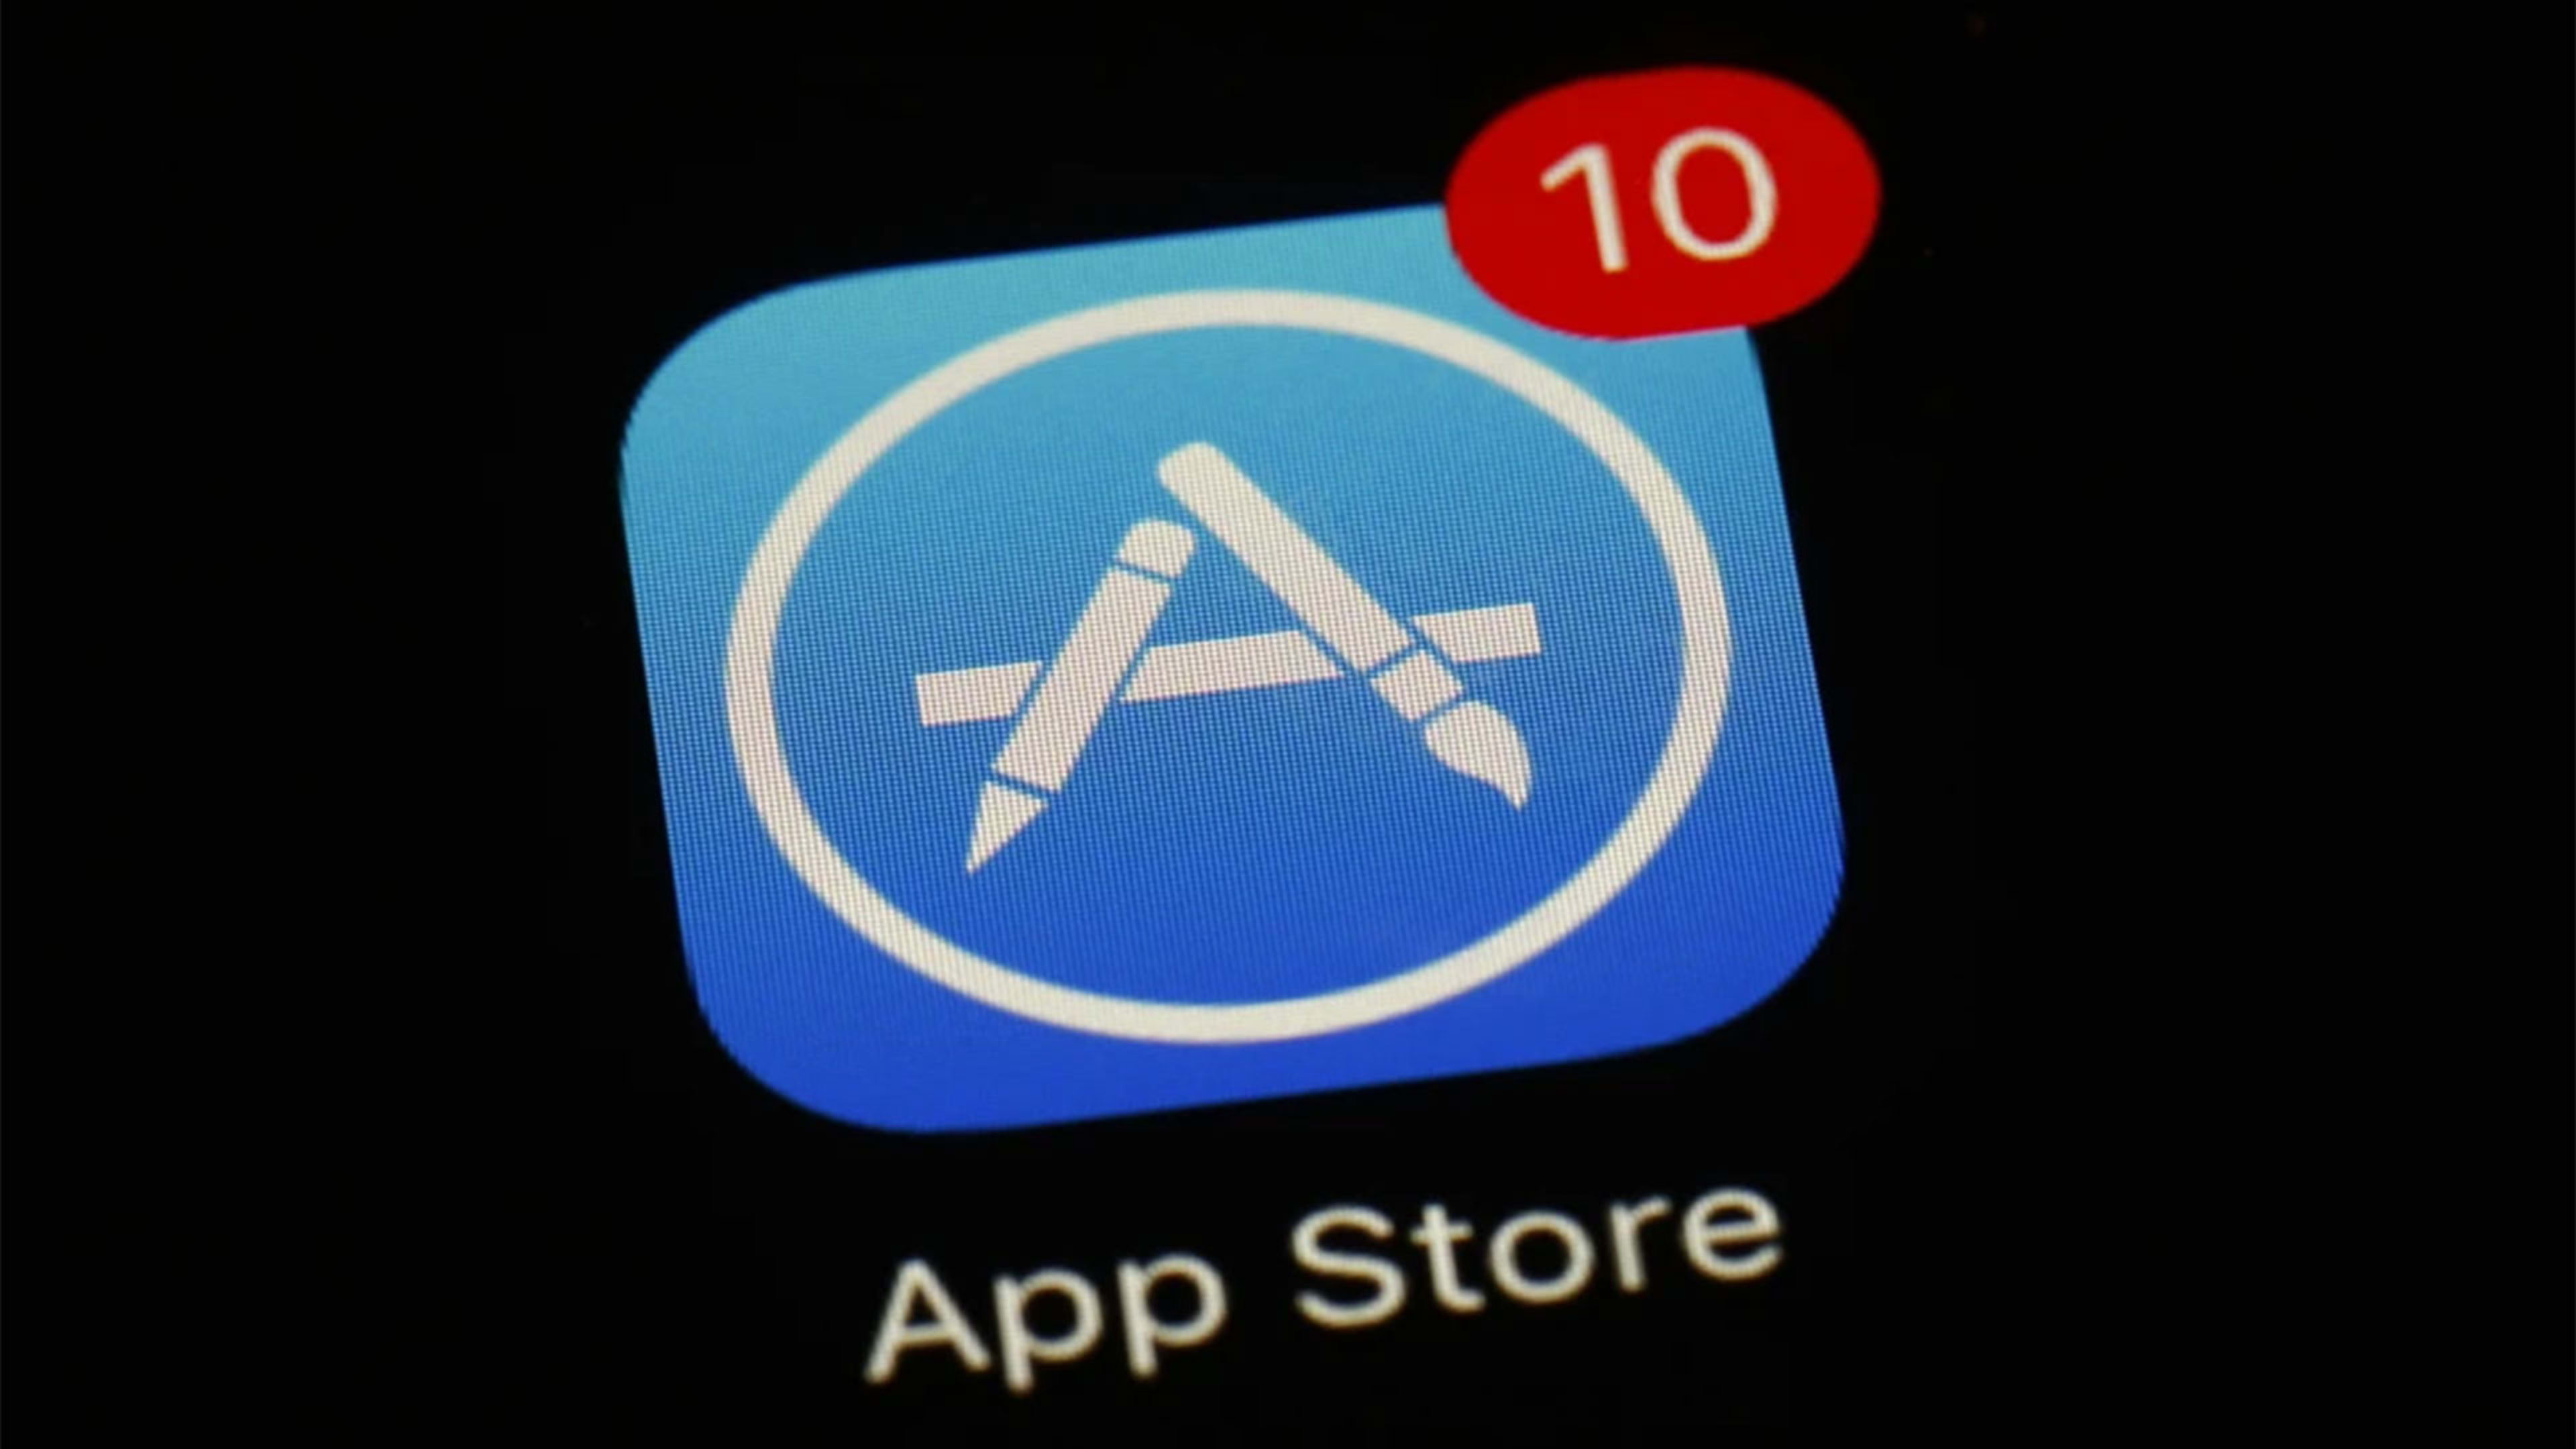 Apple will open iPhone to alternative app stores and lower fees in EU to comply with regulations